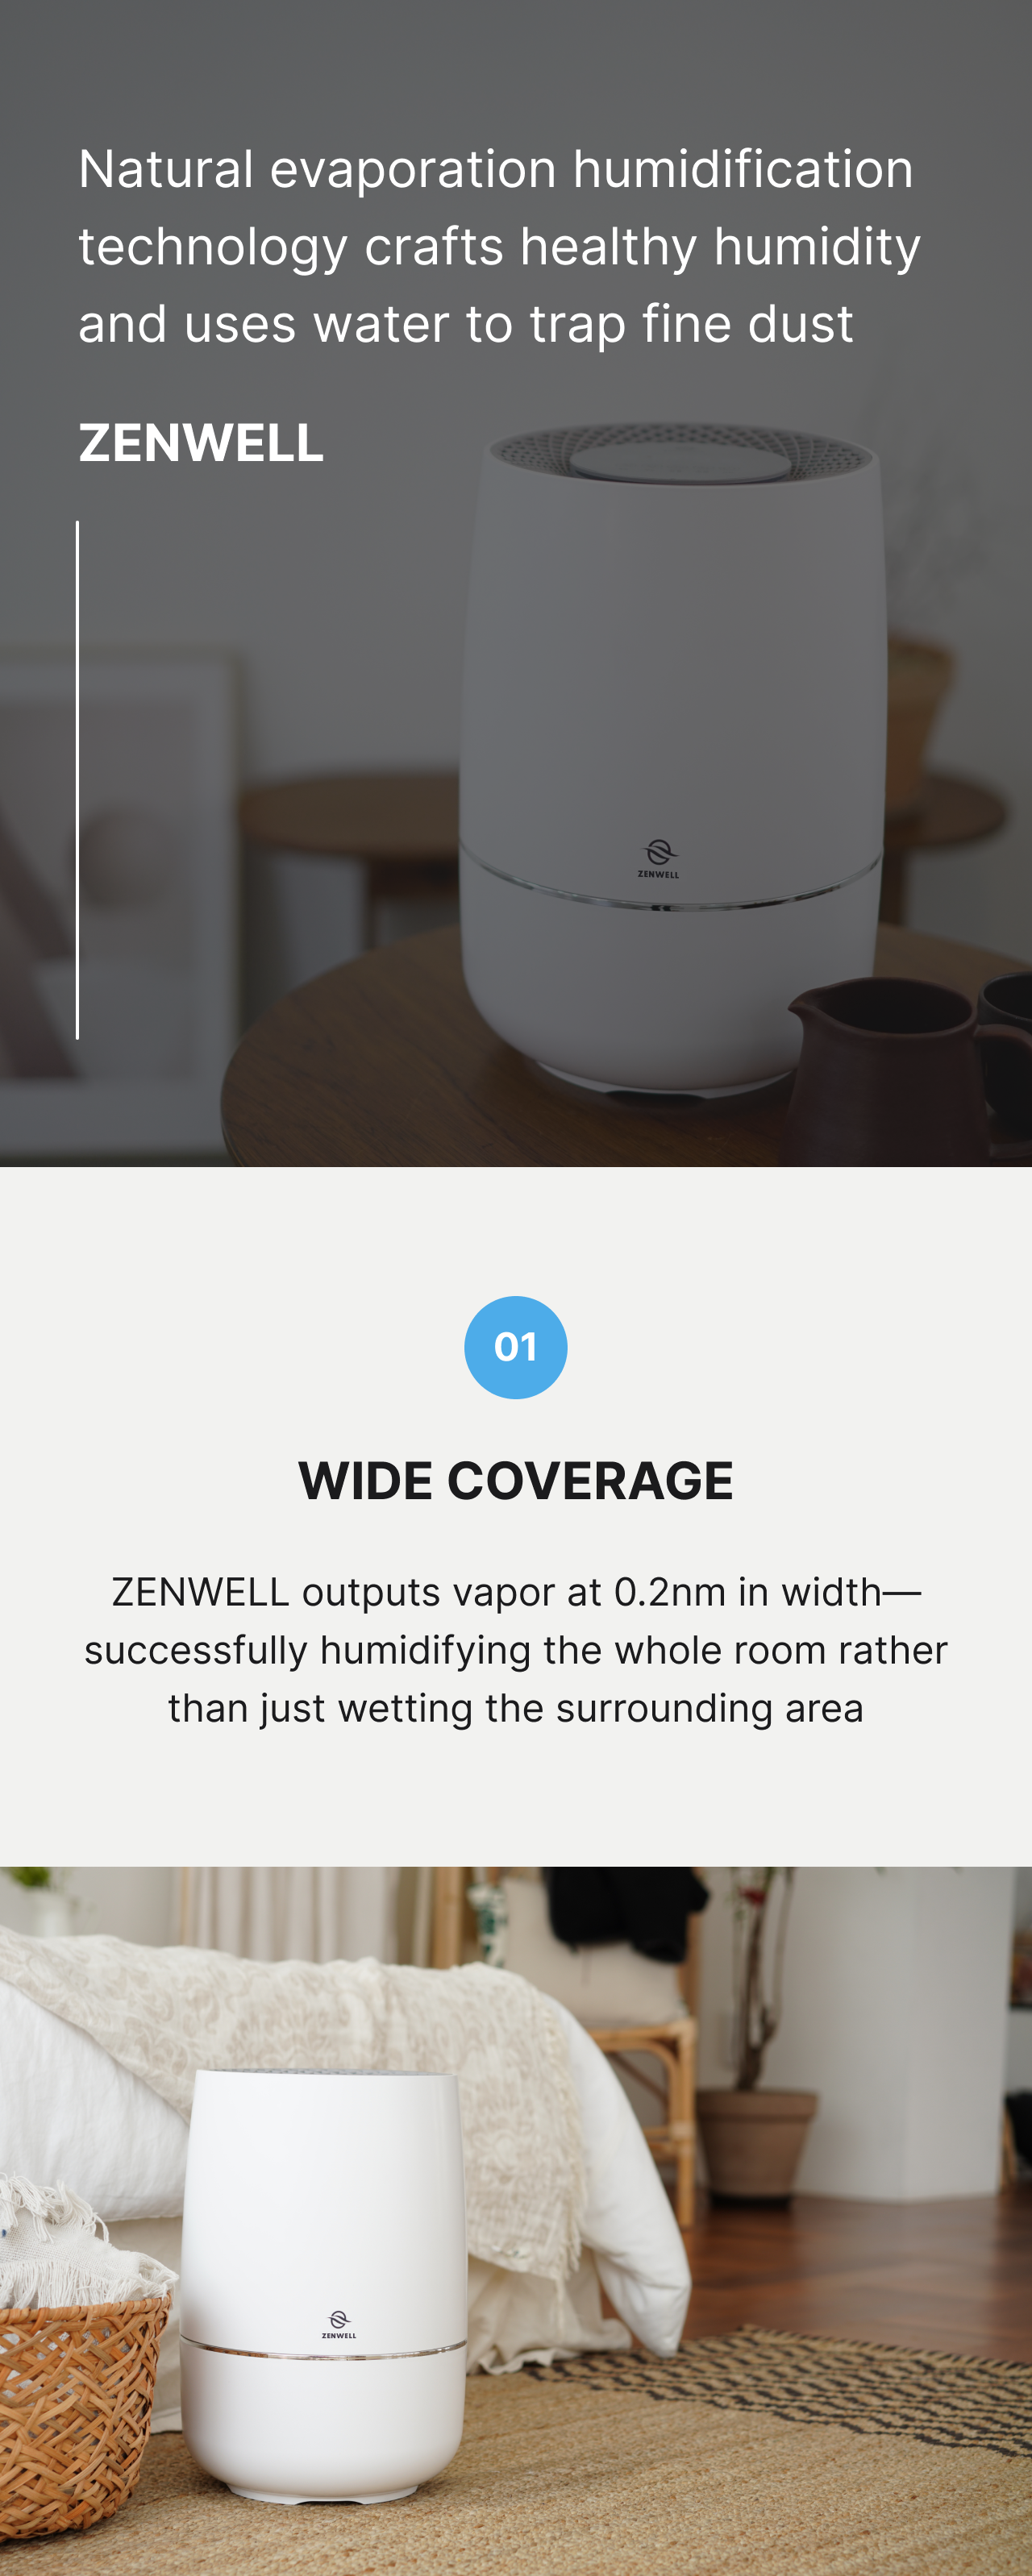 Humidifier product description image describing how natural evaporation humidification crafts healthy humidity and uses water to trap fine dust. Zenwell's device outputs vapor at 0.2nm in width—successfully humidifying the whole room rather than just wetting the surrounding area.